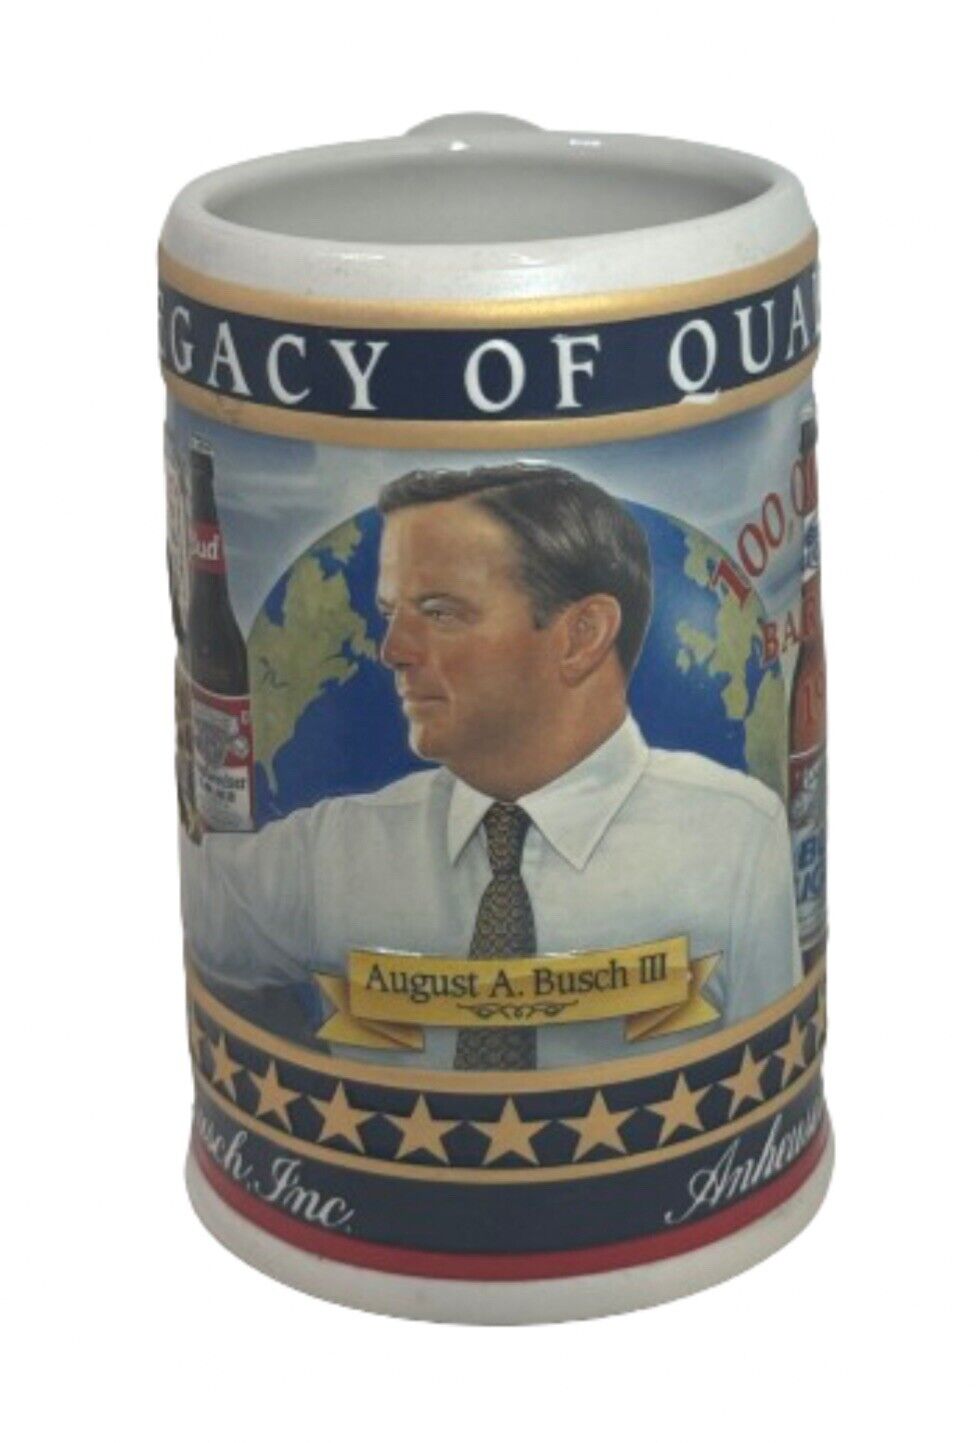 2005 Busch Family Series Stein of August A. Busch III Legacy of Quality, #38003